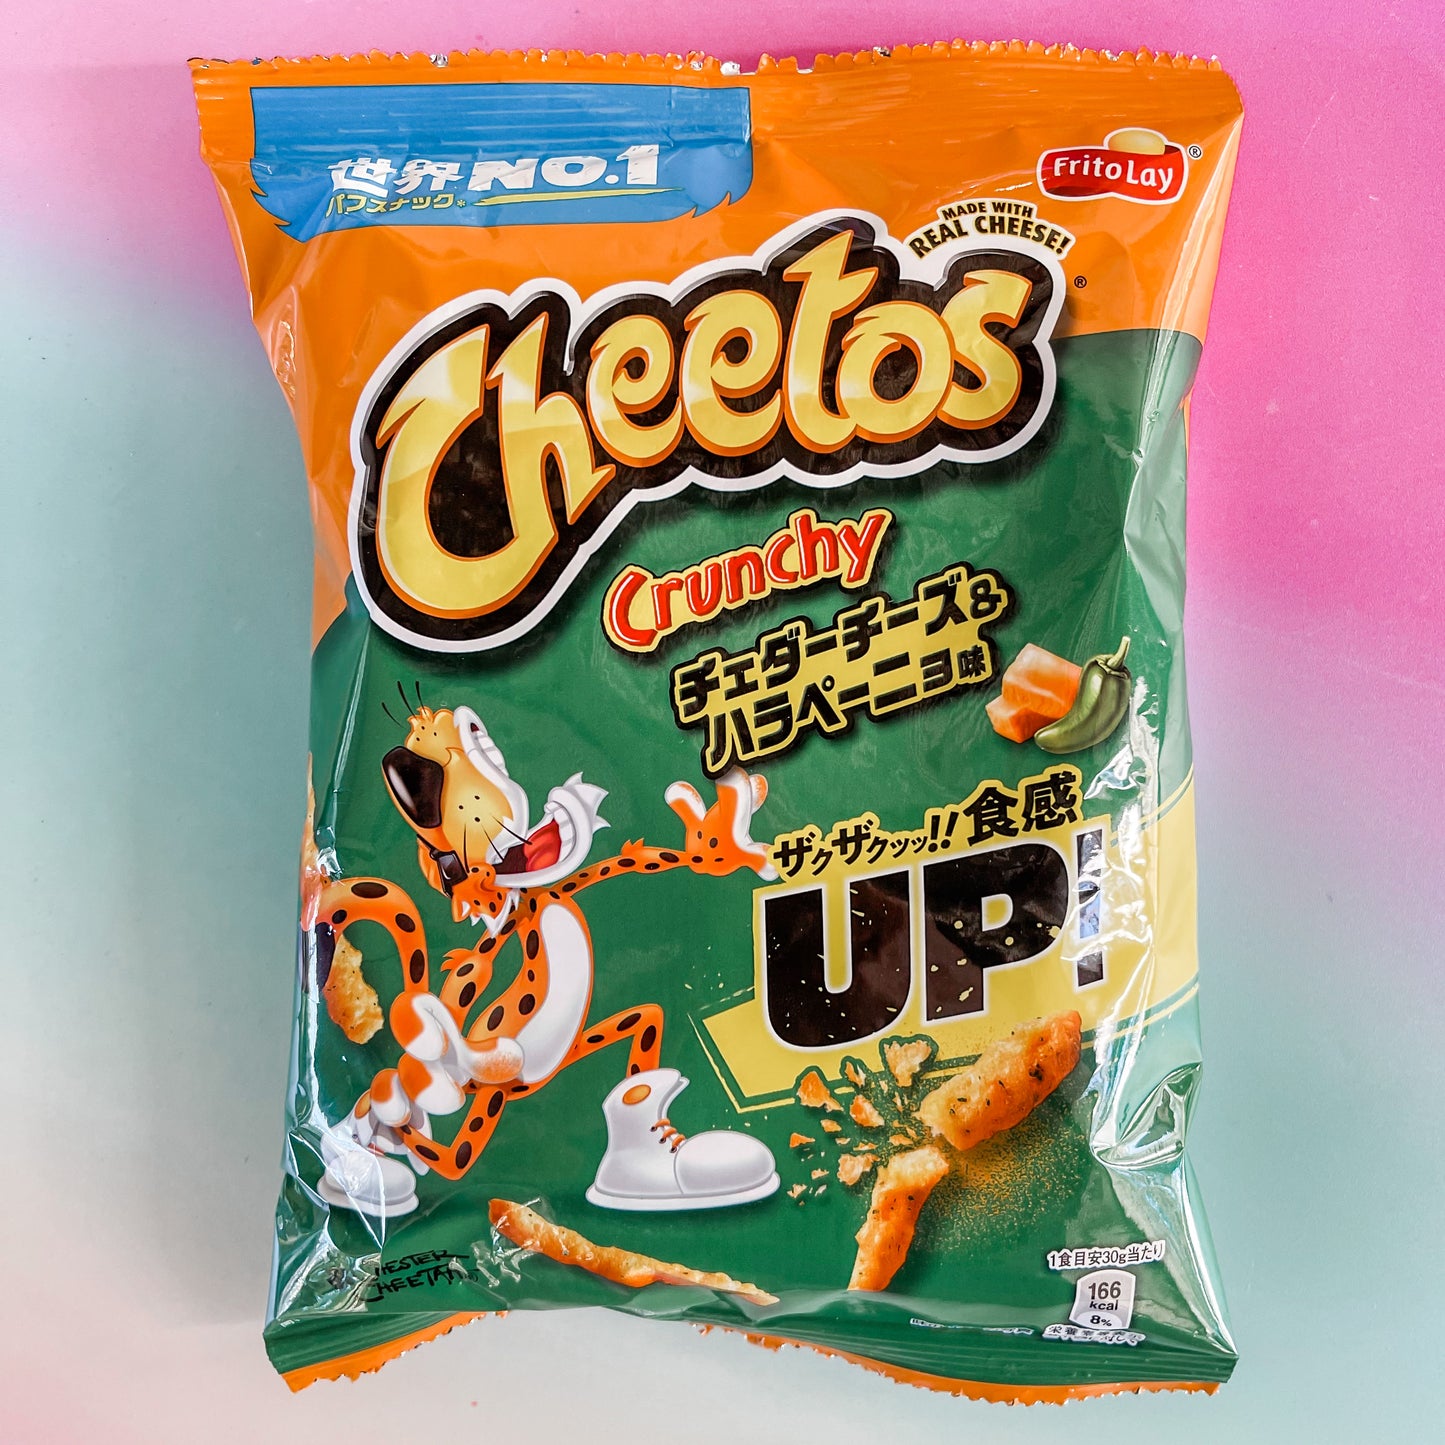 Cheetos from Japan - Cheese Jalapeno